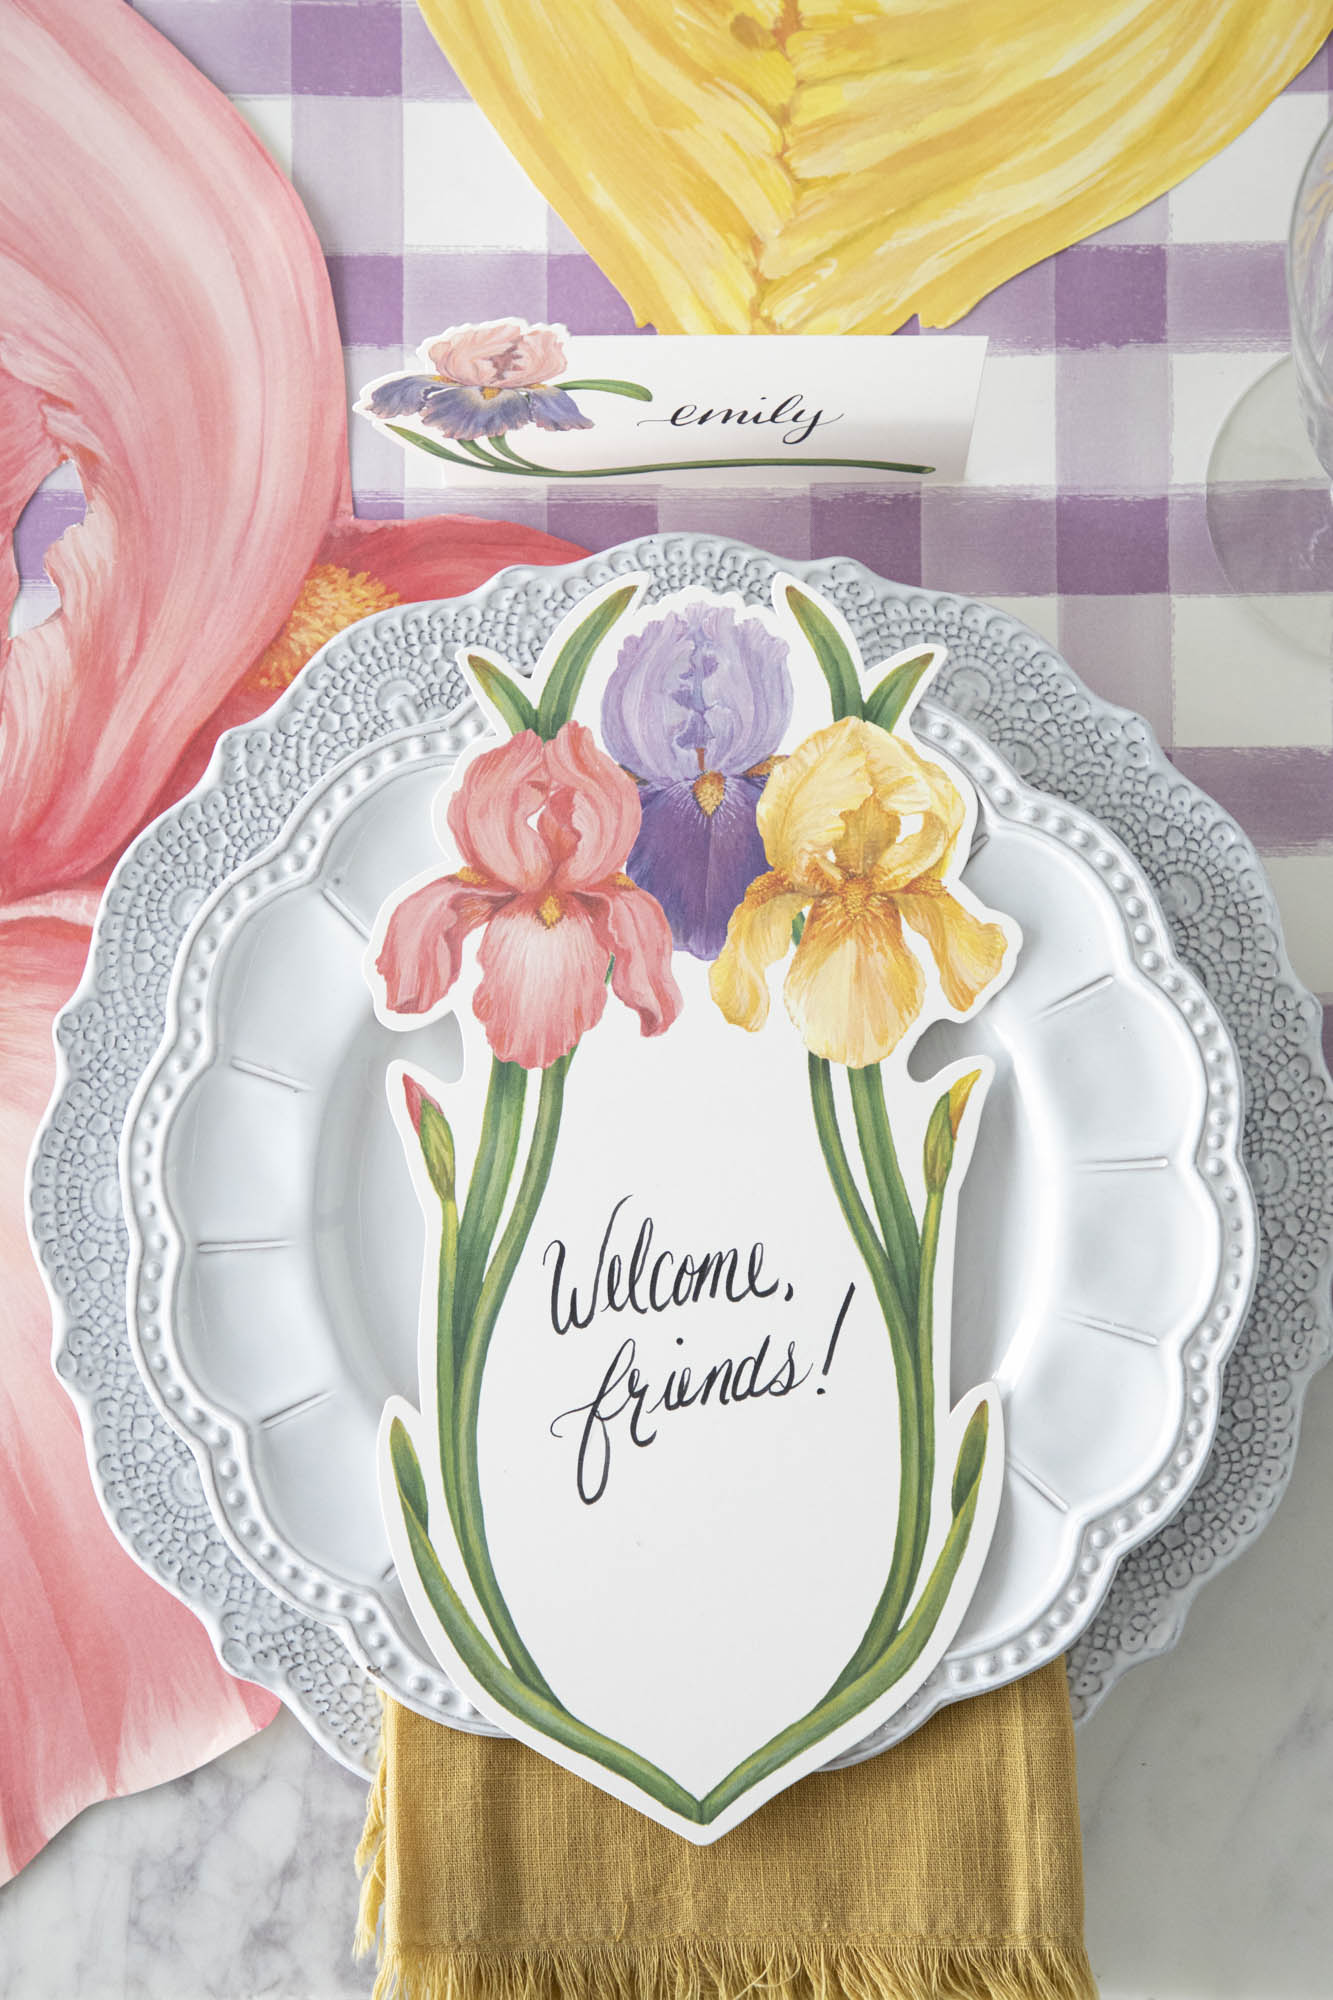 A plate with beautiful flowers on it can be a perfect addition to your Hester &amp; Cook Iris Table Card or menus. The colorful blossoms captivate the eye, making this dish label an attractive choice for any occasion.